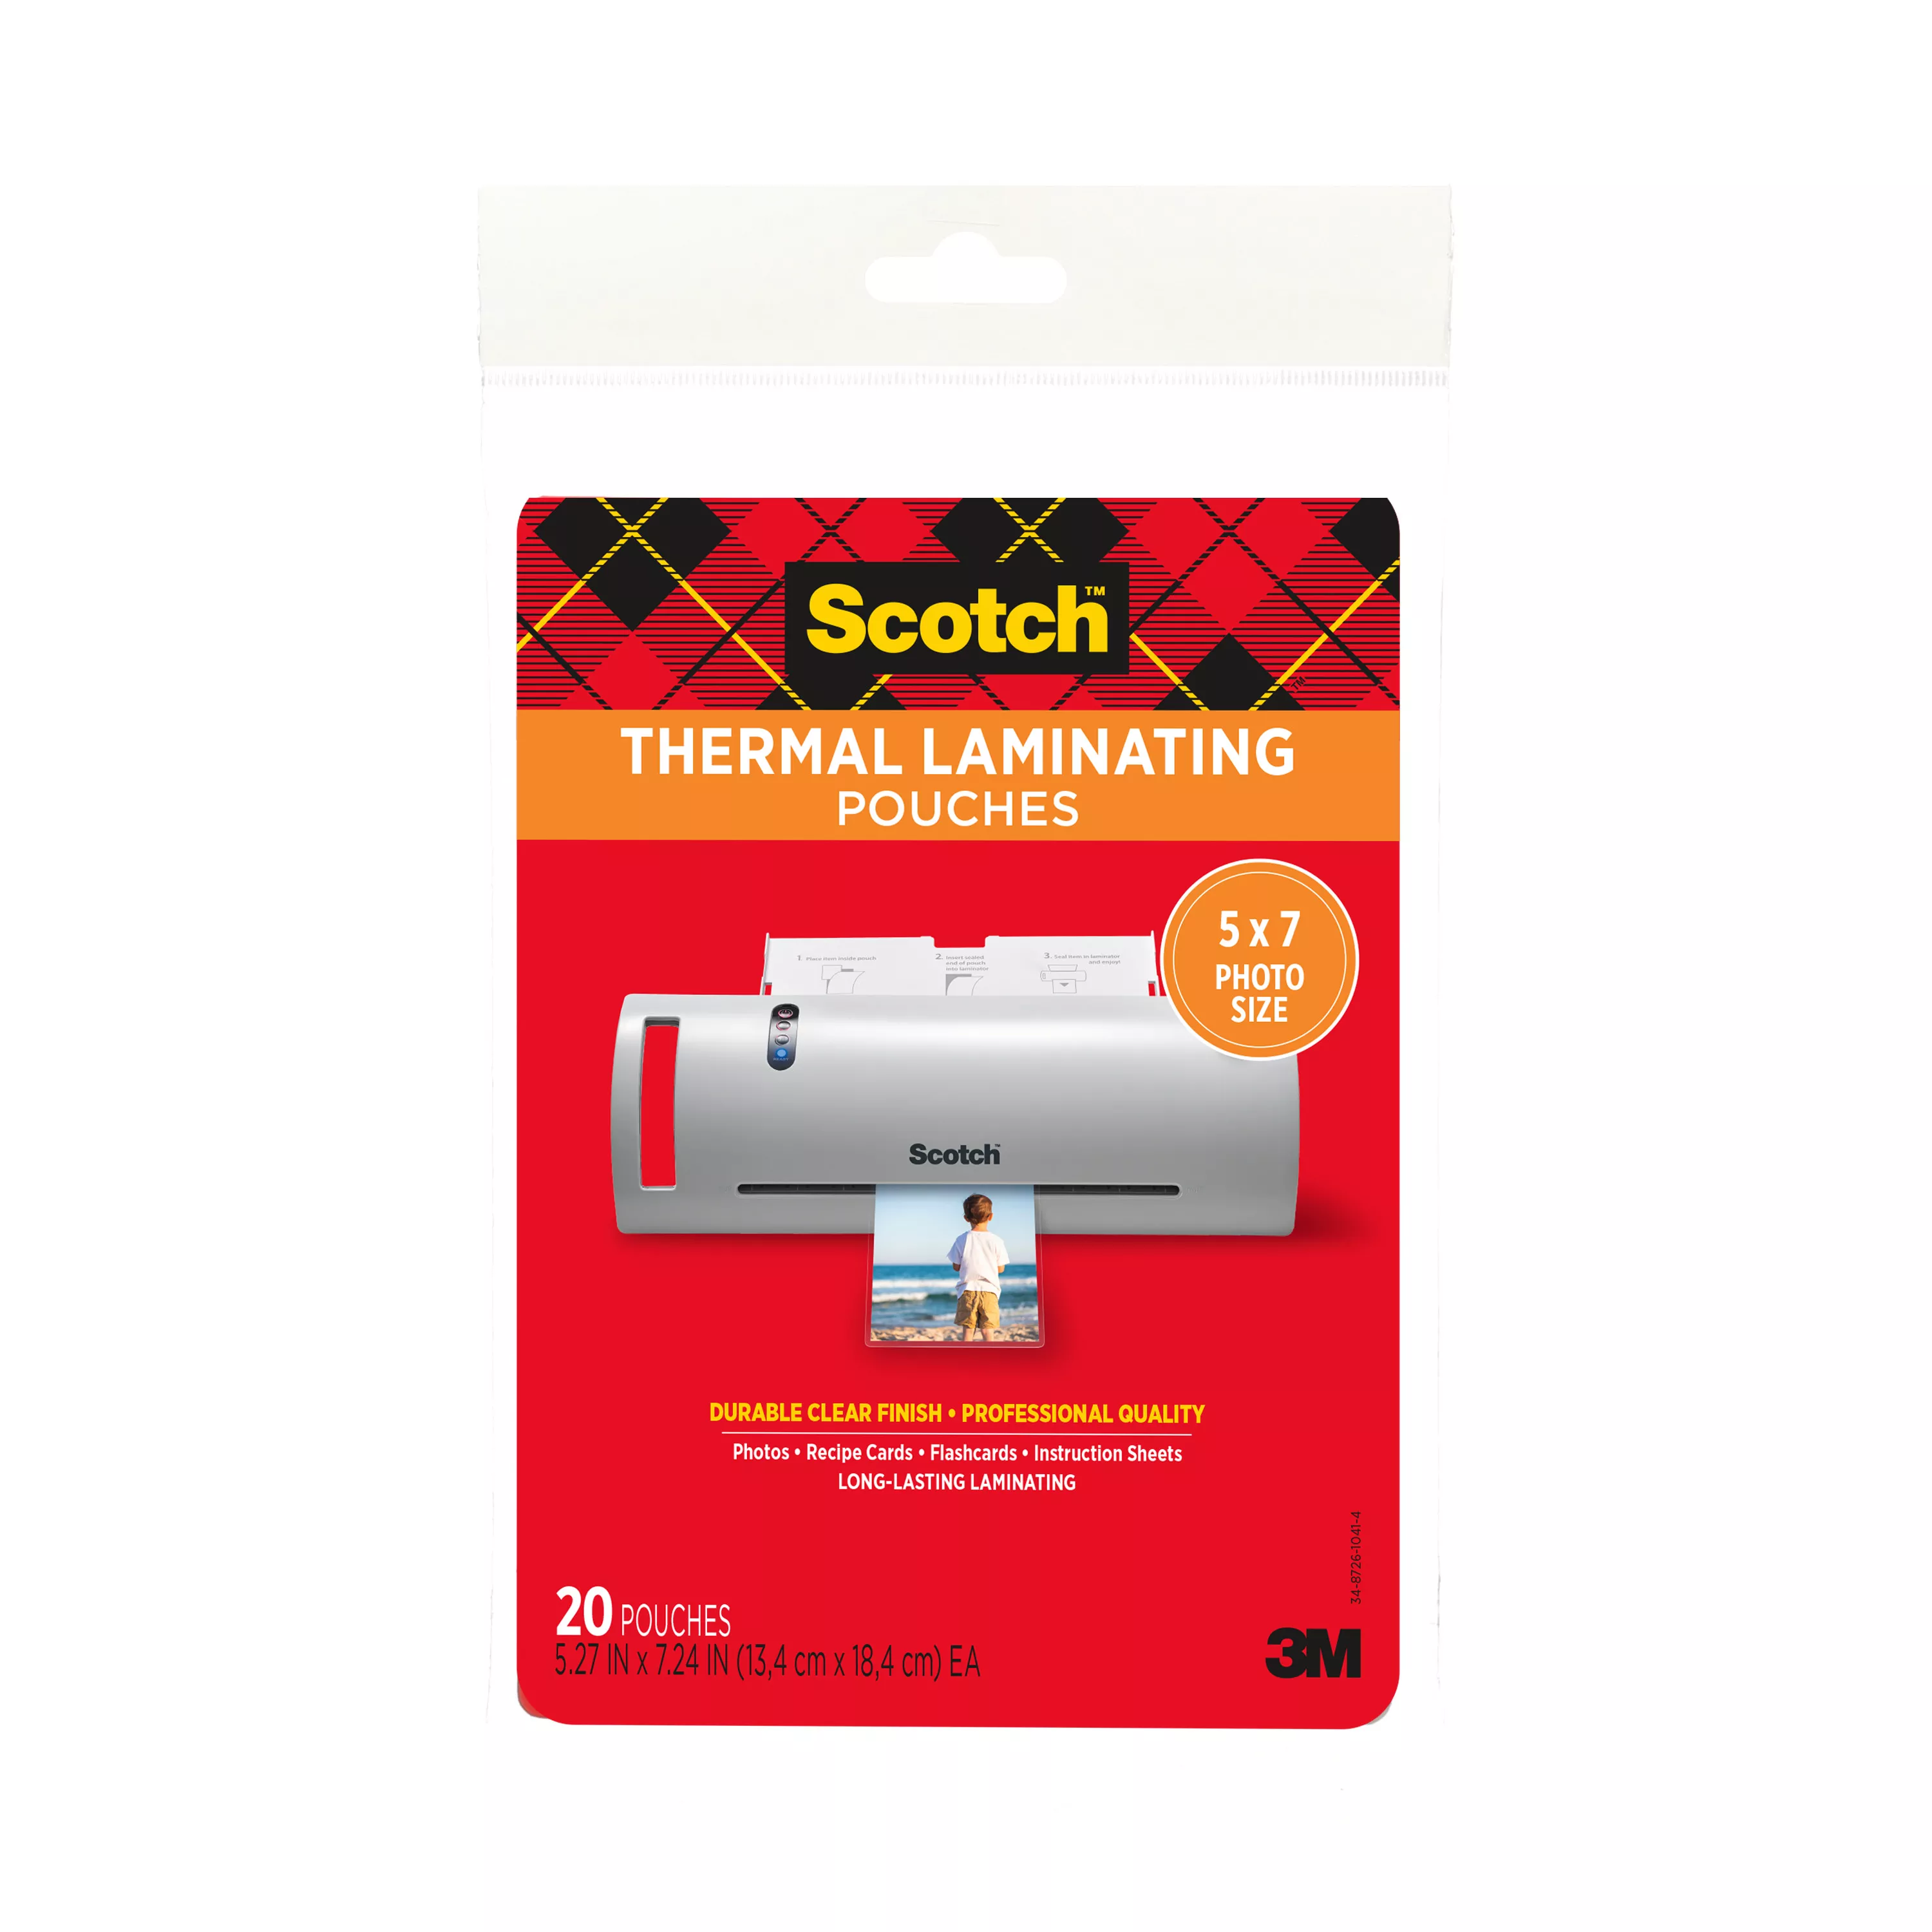 Scotch™ Thermal Pouches TP5903-20 for items up to 5.27 in x 7.24 in